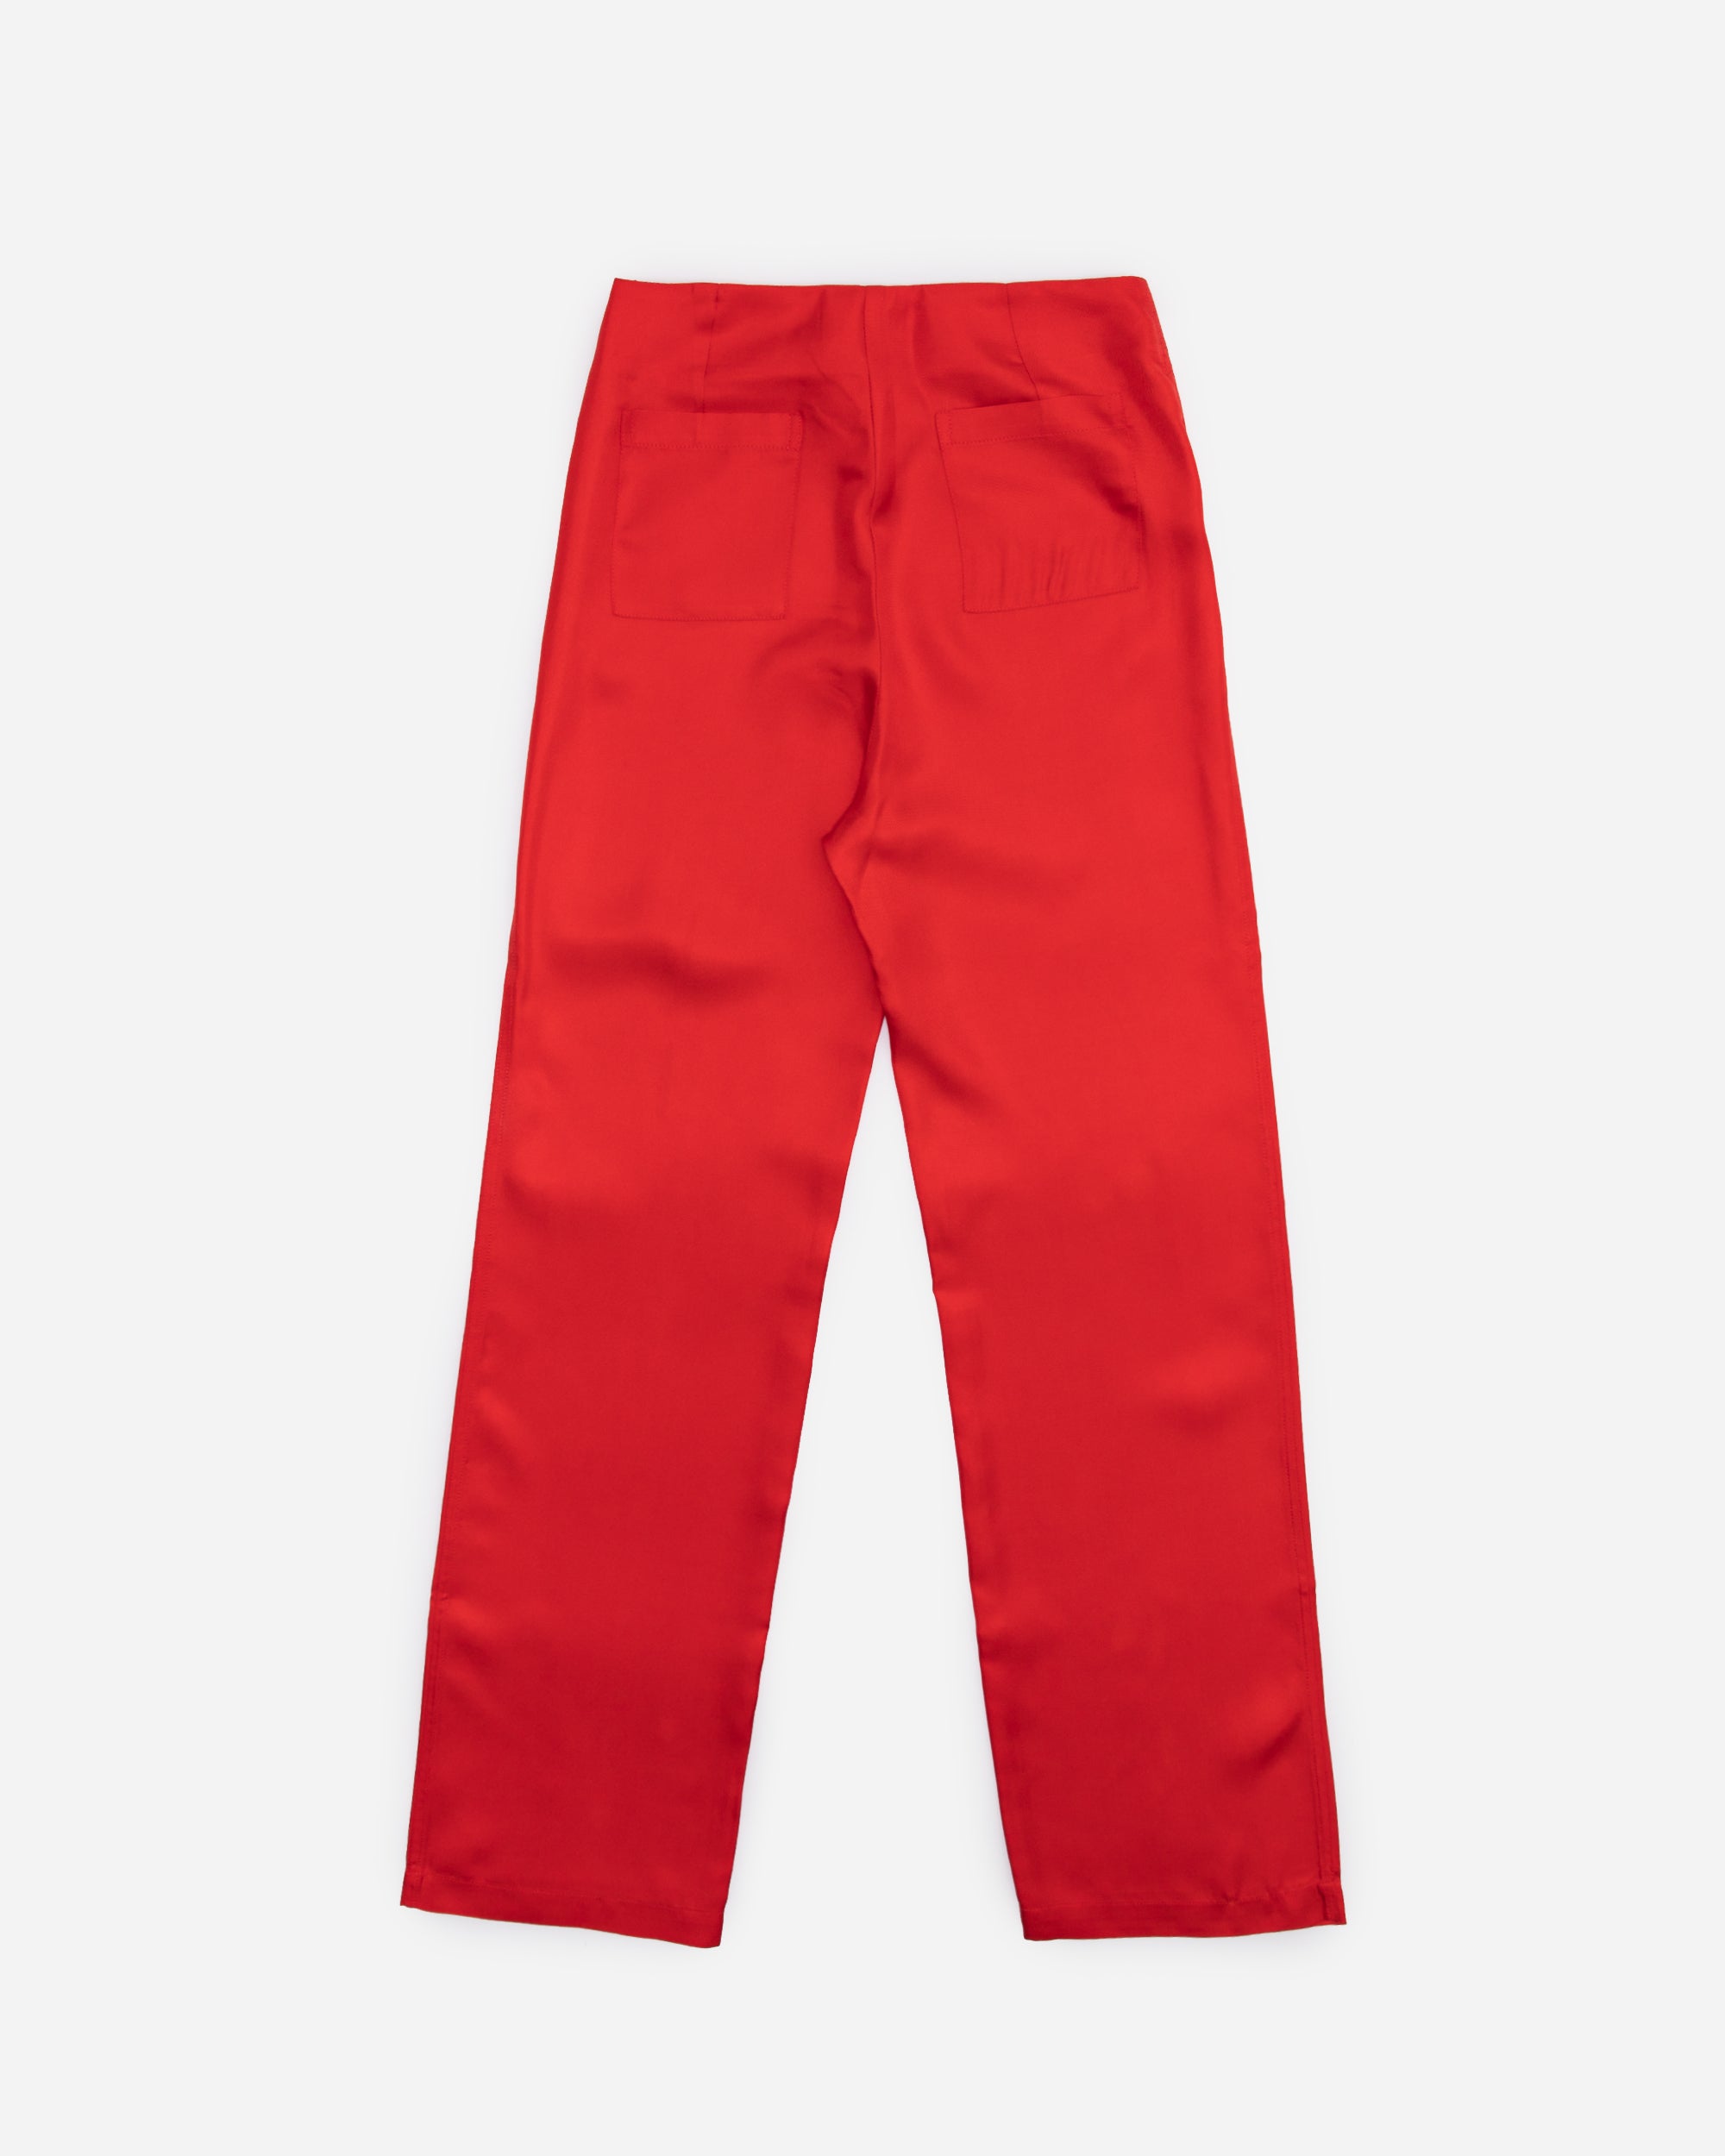 SOULLAND Asta Pants Red 11005-1008-RED